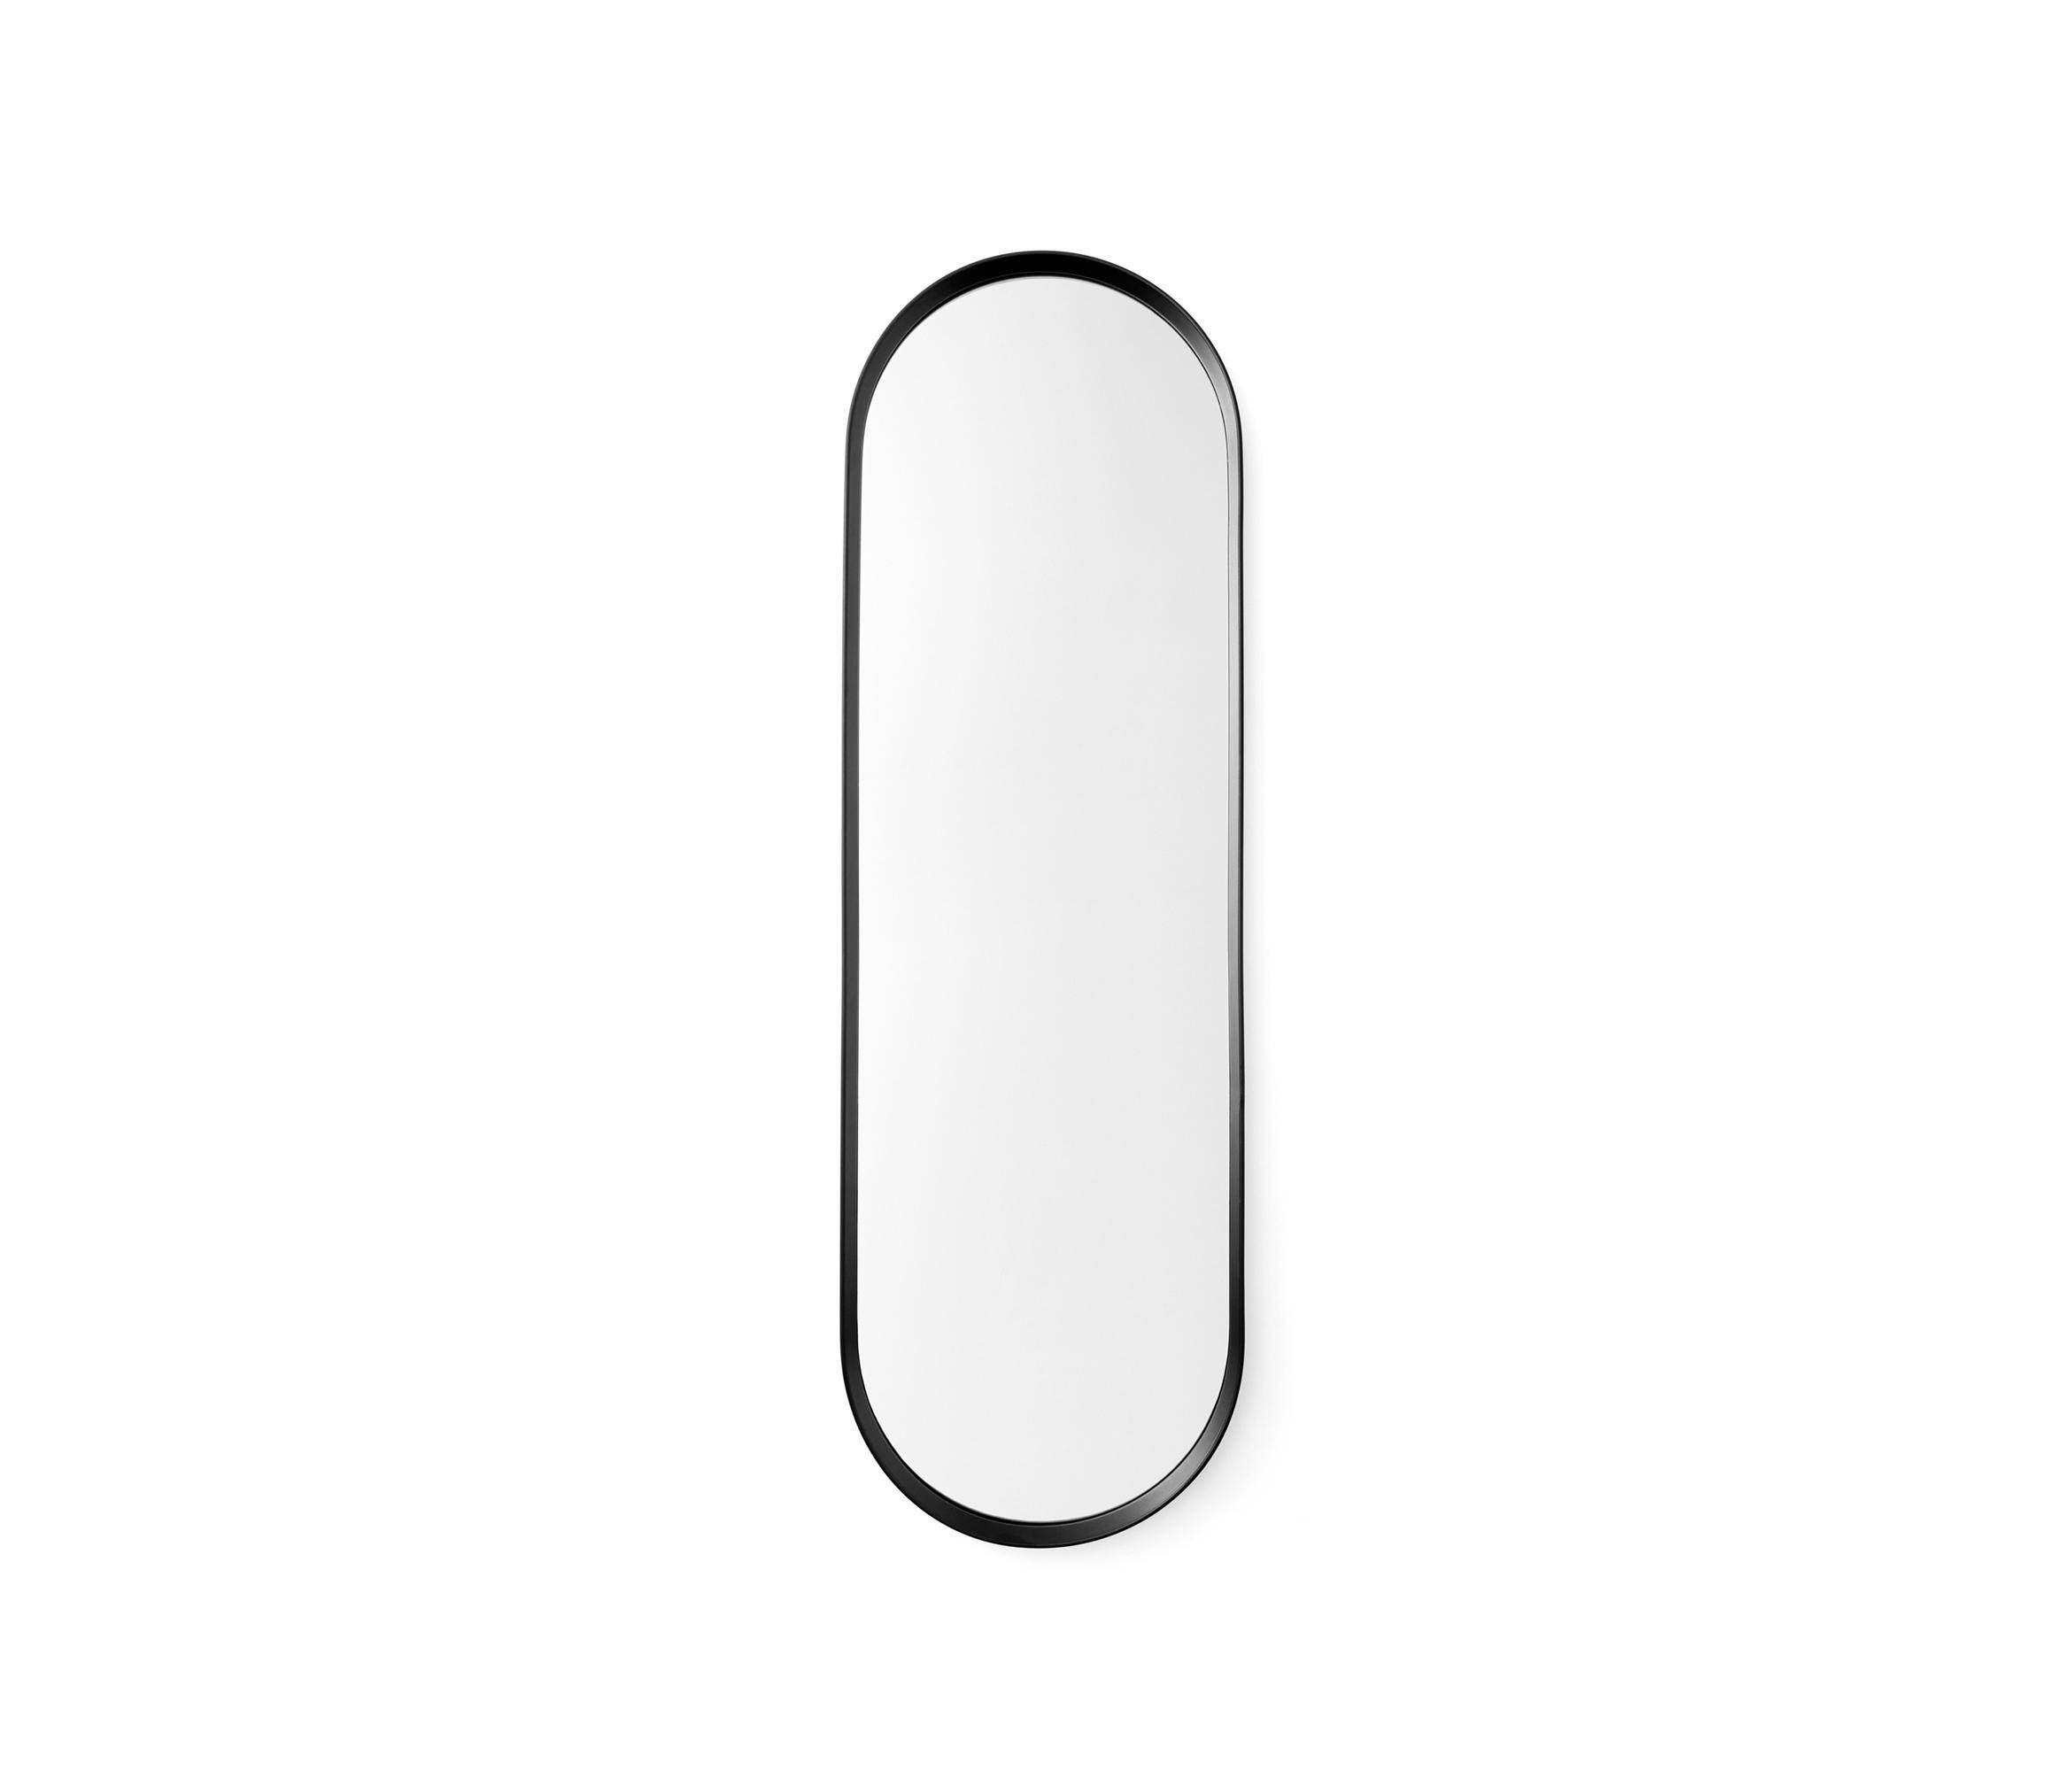 Norm Wall Mirror, Oval, Black – Mirrors From Menu | Architonic With Oval Black Mirrors (View 15 of 25)